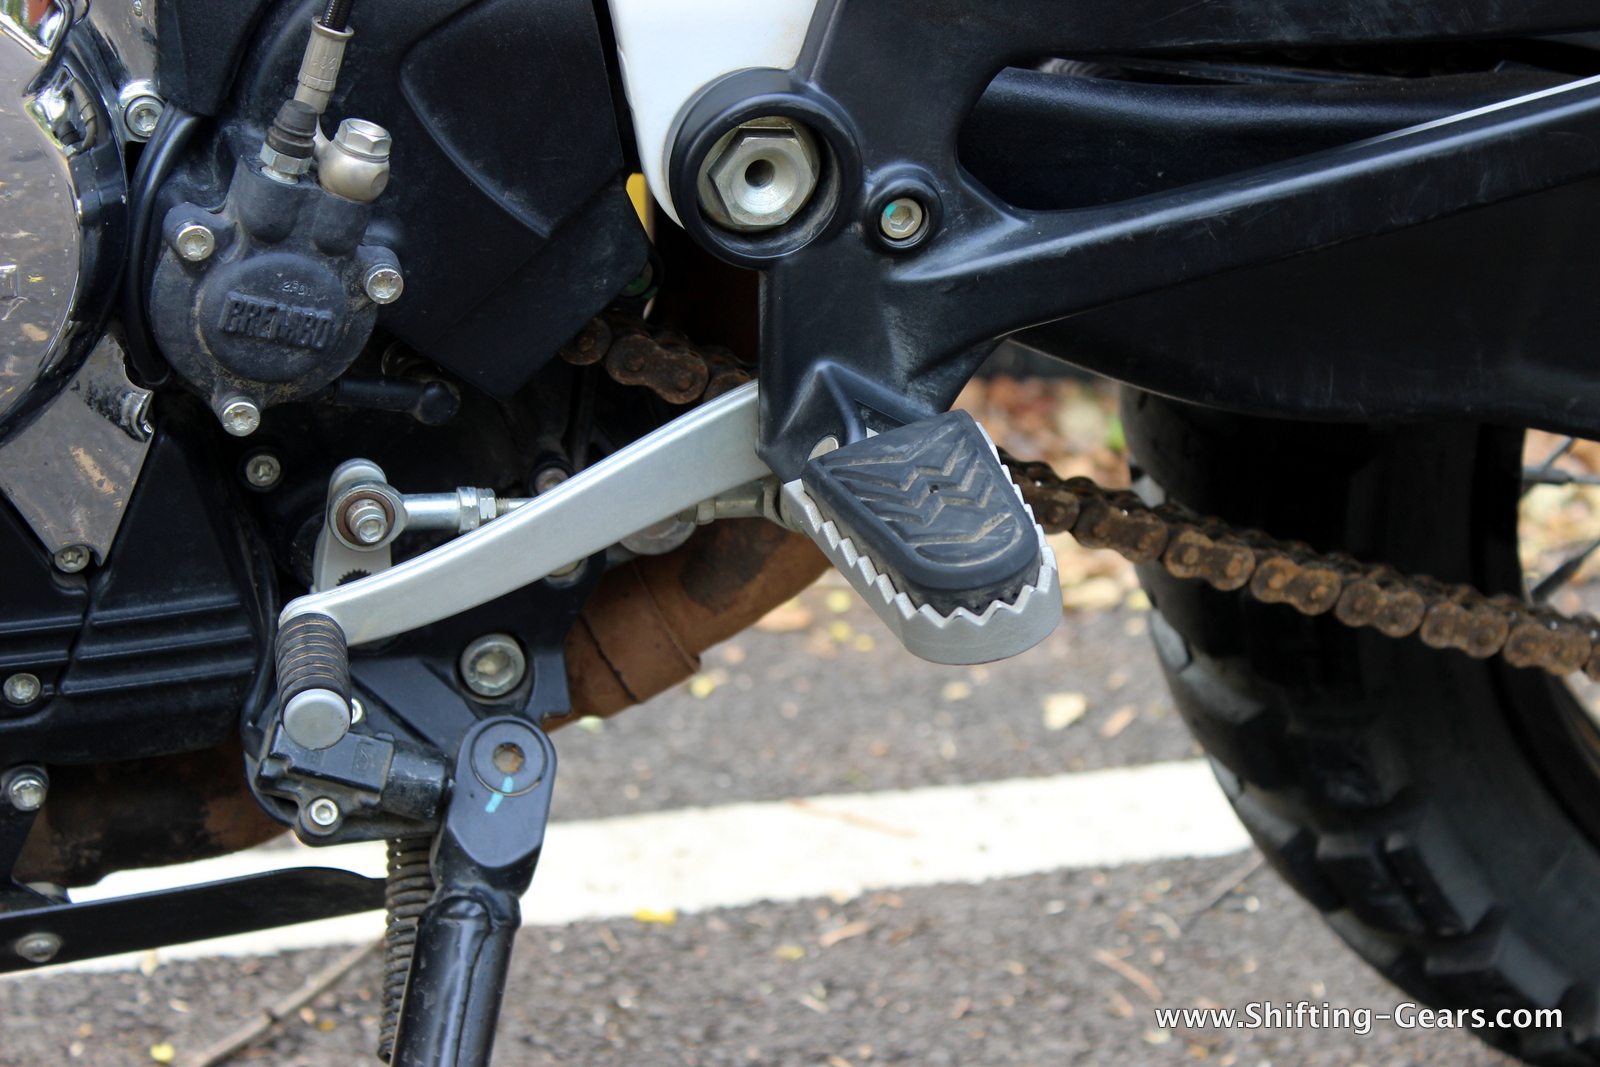 Toothed footpegs suit the bikes rough character